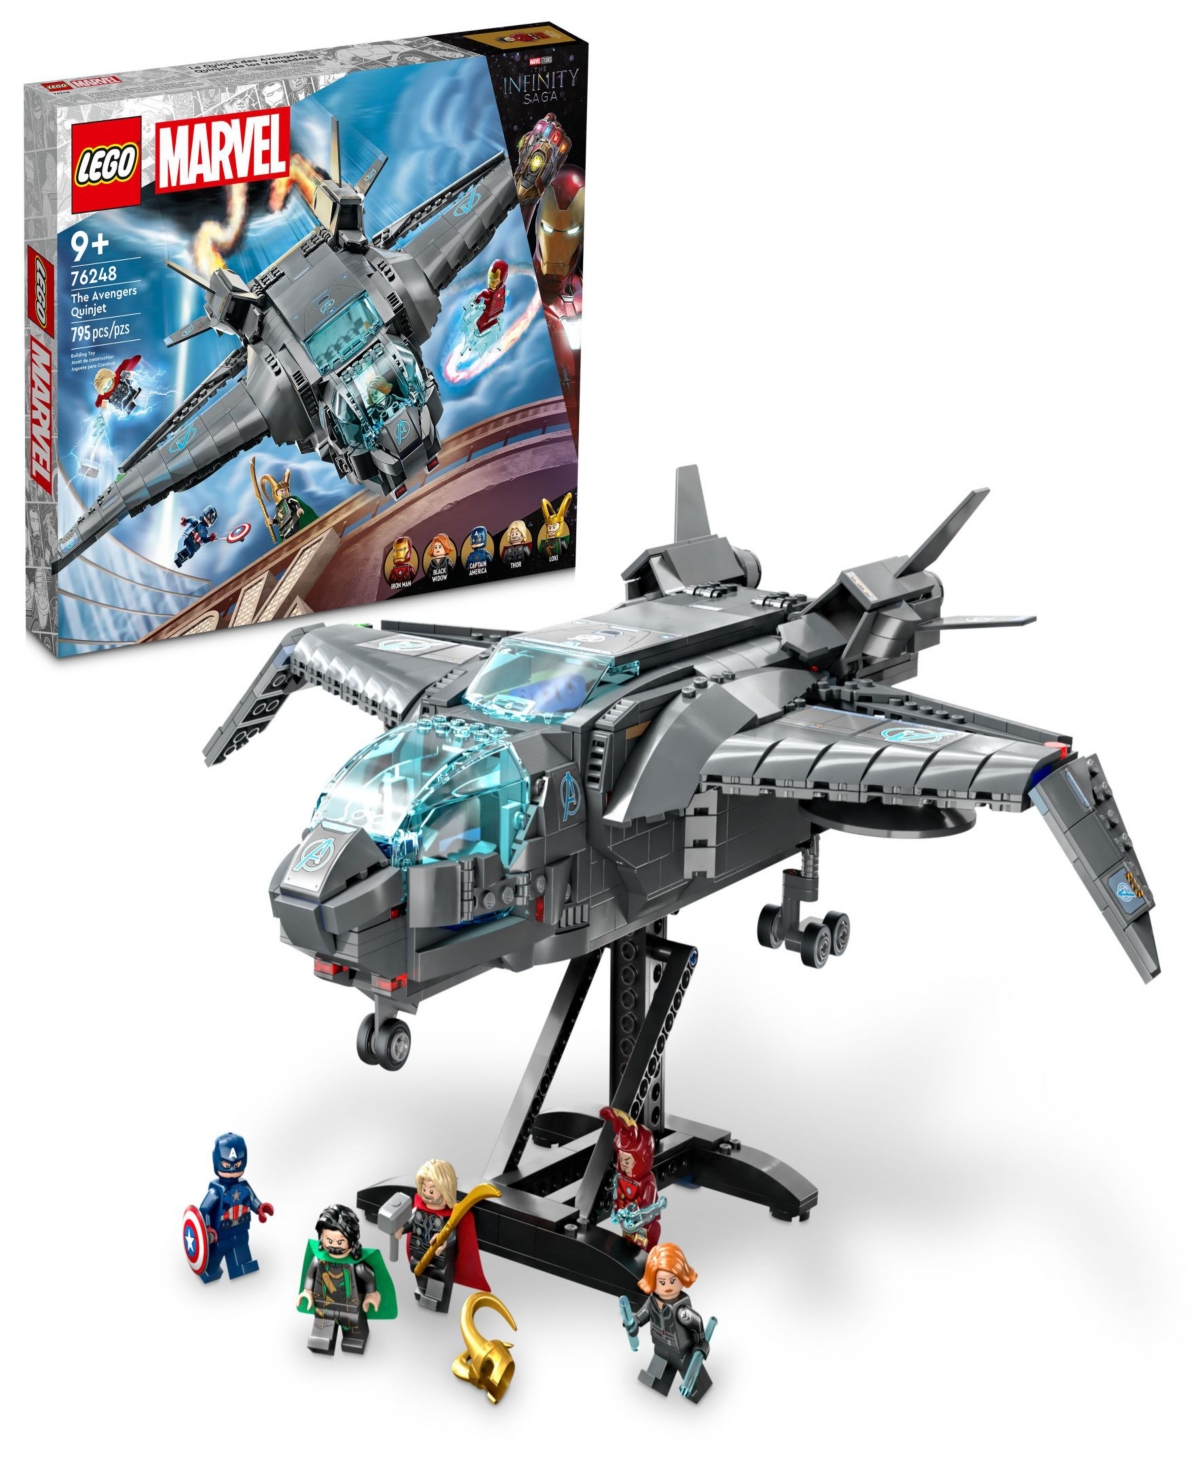 Lego Babies' Marvel The Avengers Quinjet 76248 Building Toy Set, 795 Pieces In Metallic